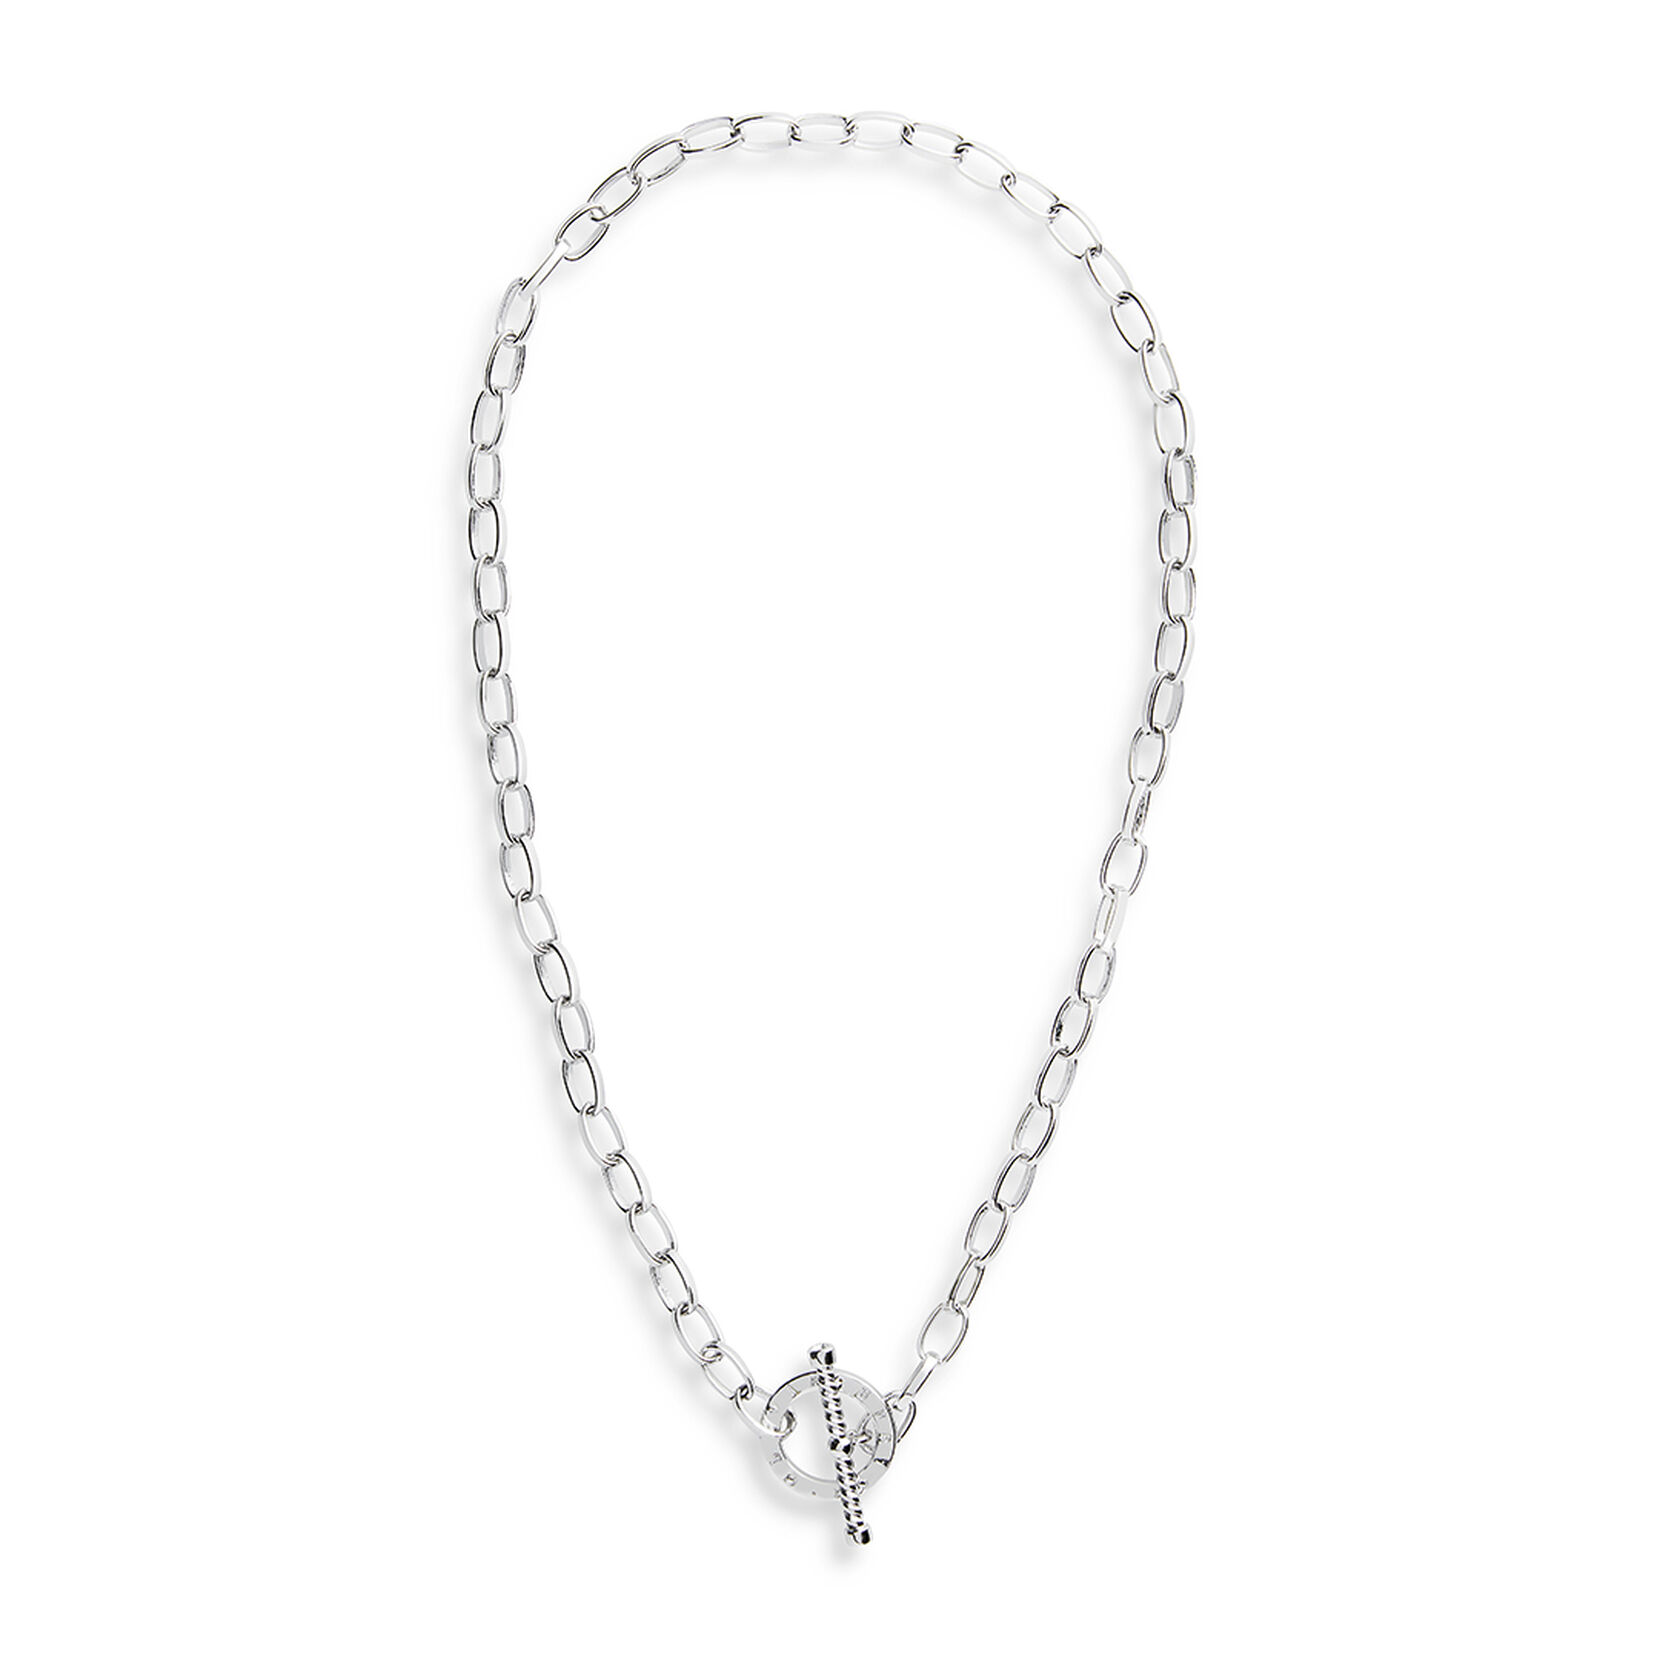 Bejeweled Classics Silver Tbar Necklace